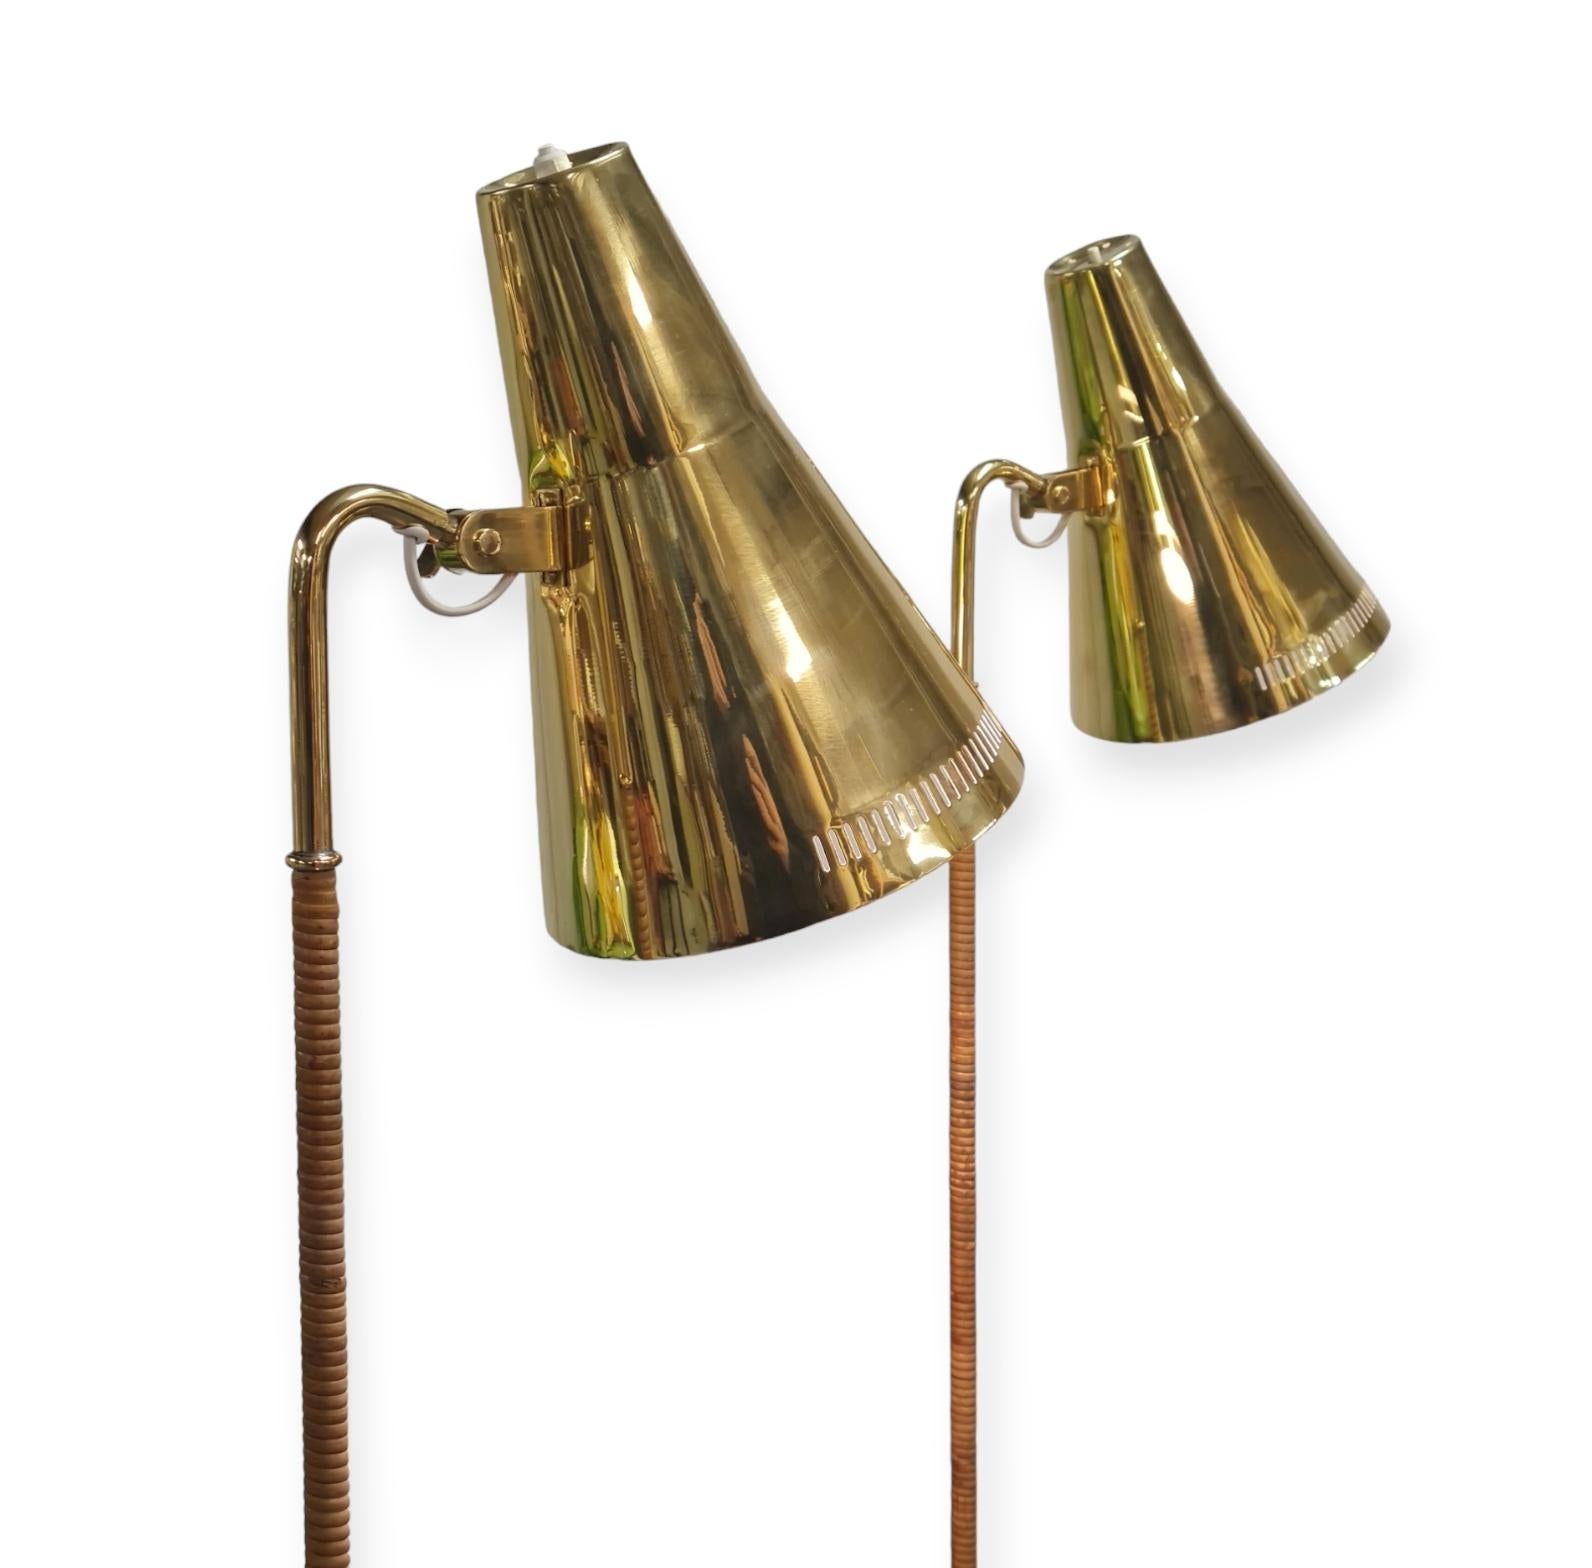 A pair of gracefully slim floor lamps with a solid brass shade and a rattan wrapped stem. These lamps harmoniously combine the coldness of brass and natural warmth of rattan to create a design that can enhance the finest of interiors, private or